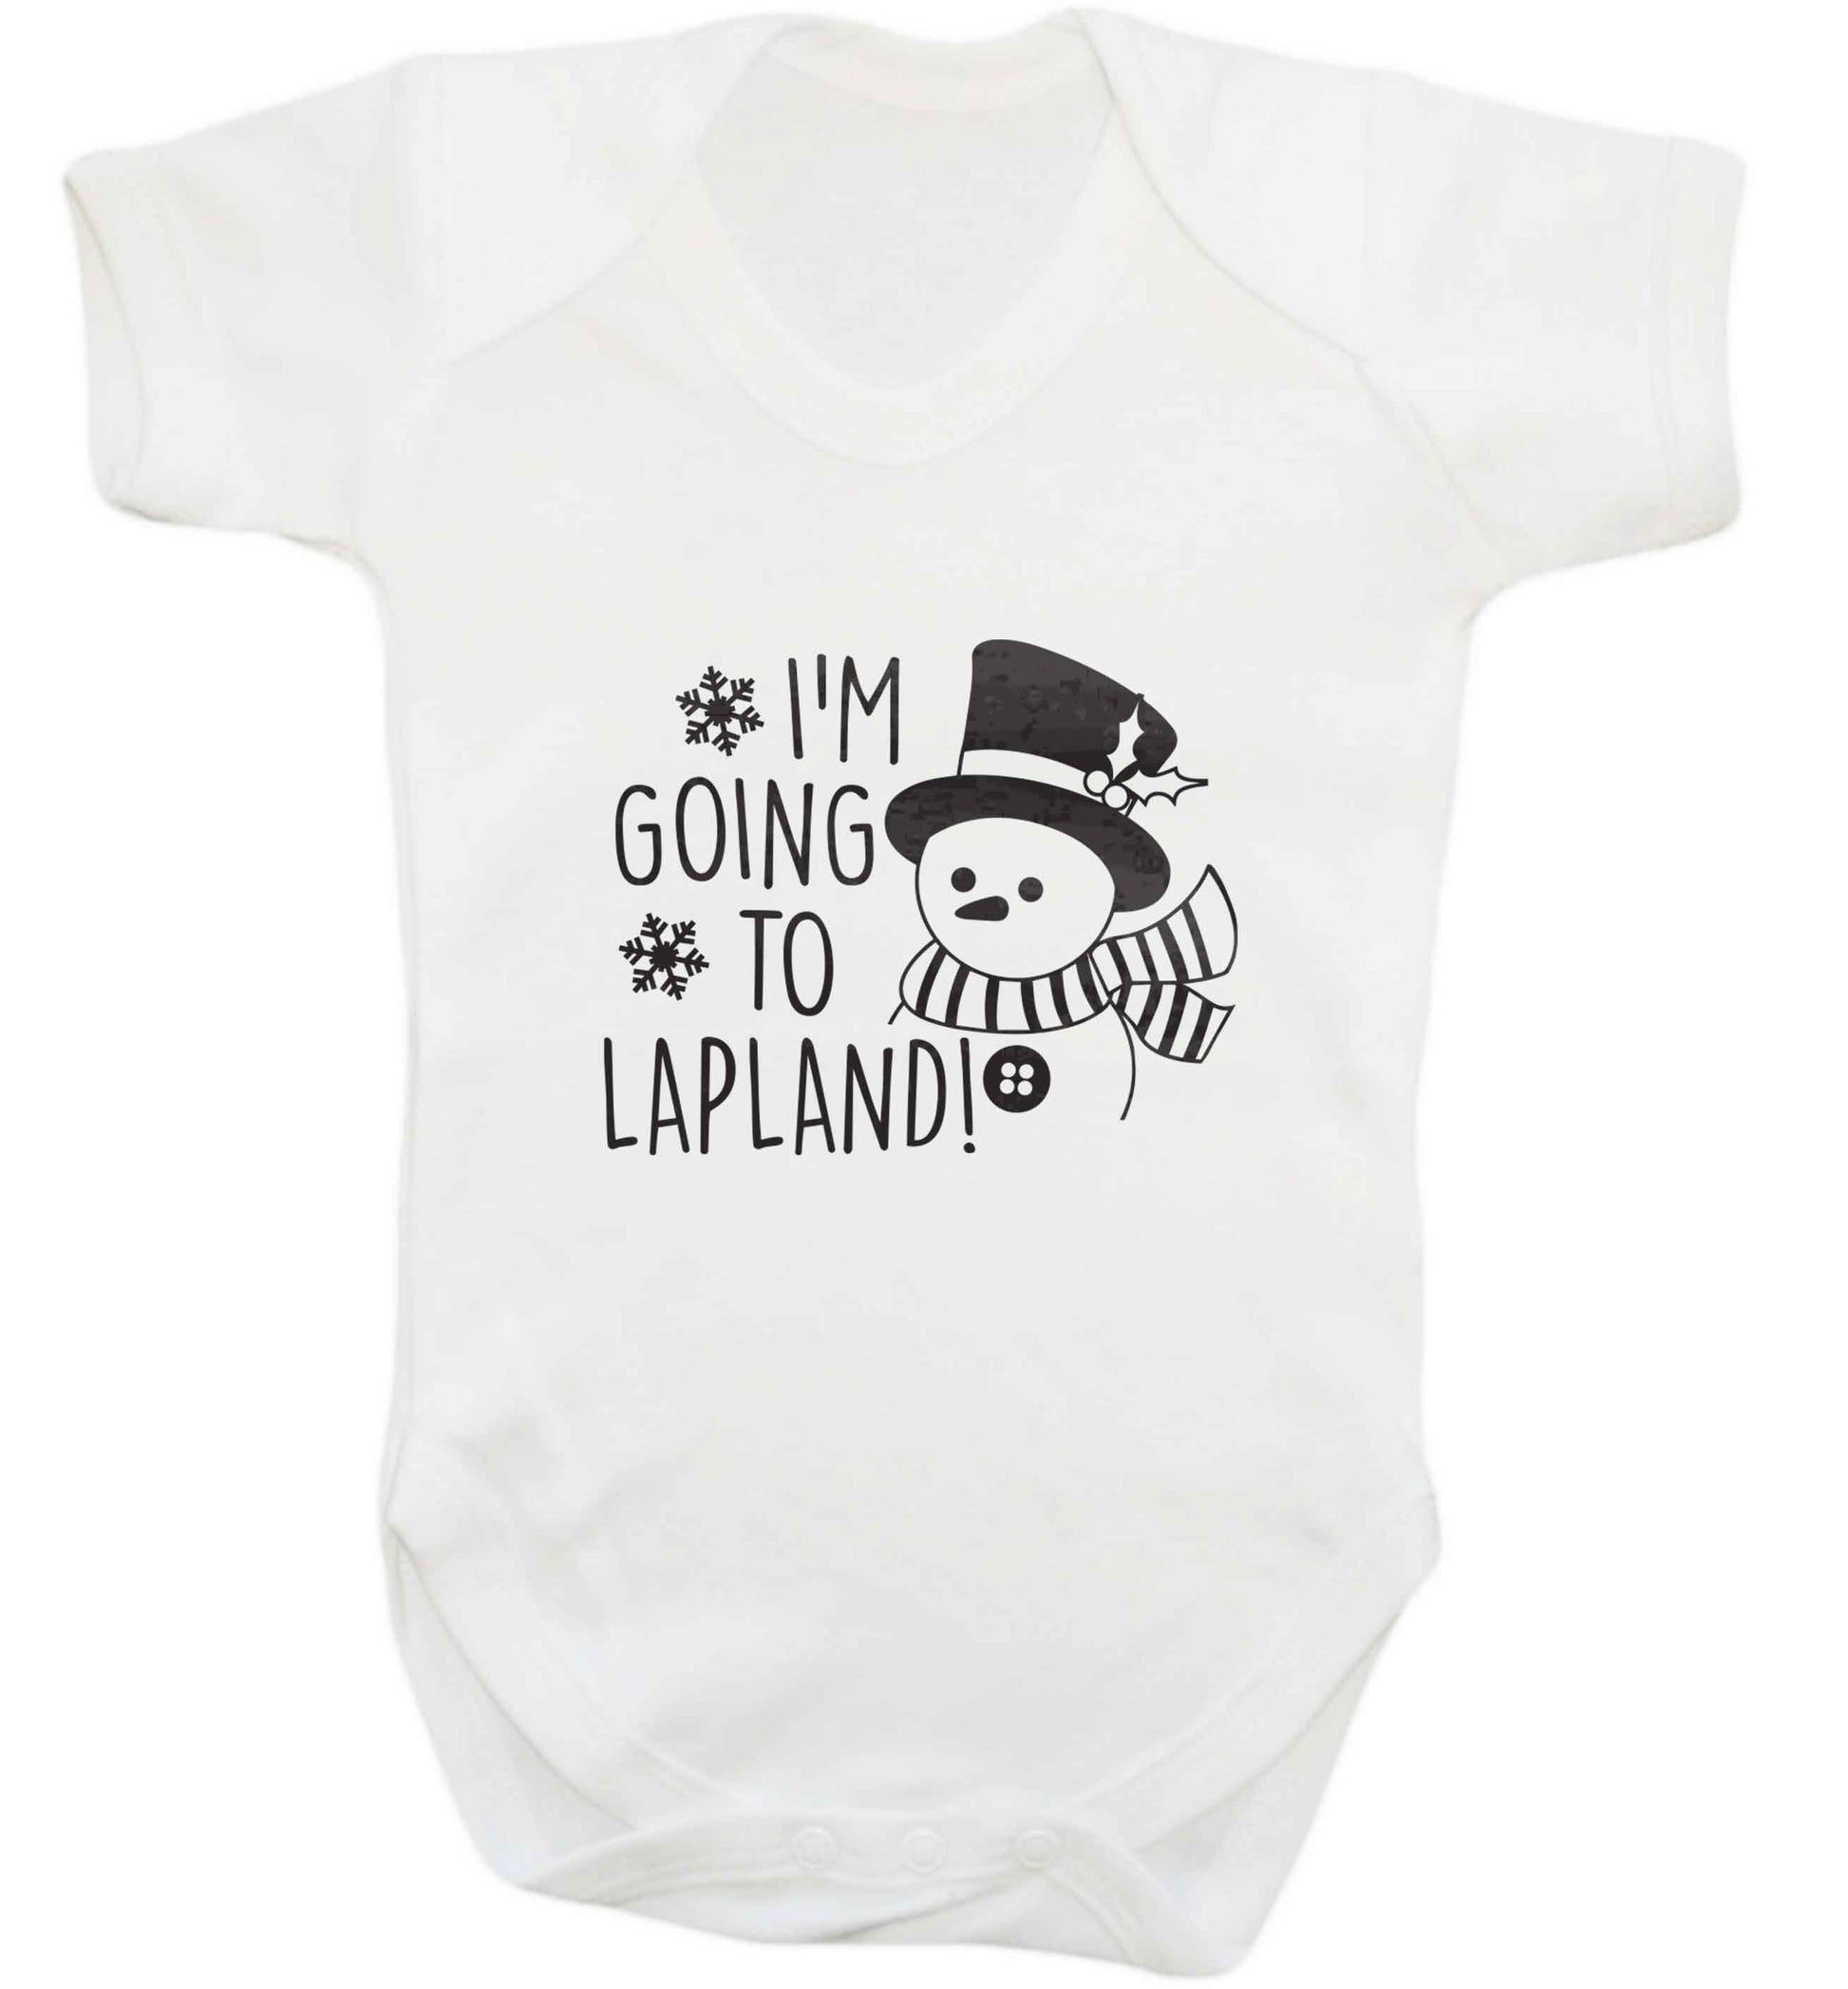 I'm going to Lapland baby vest white 18-24 months